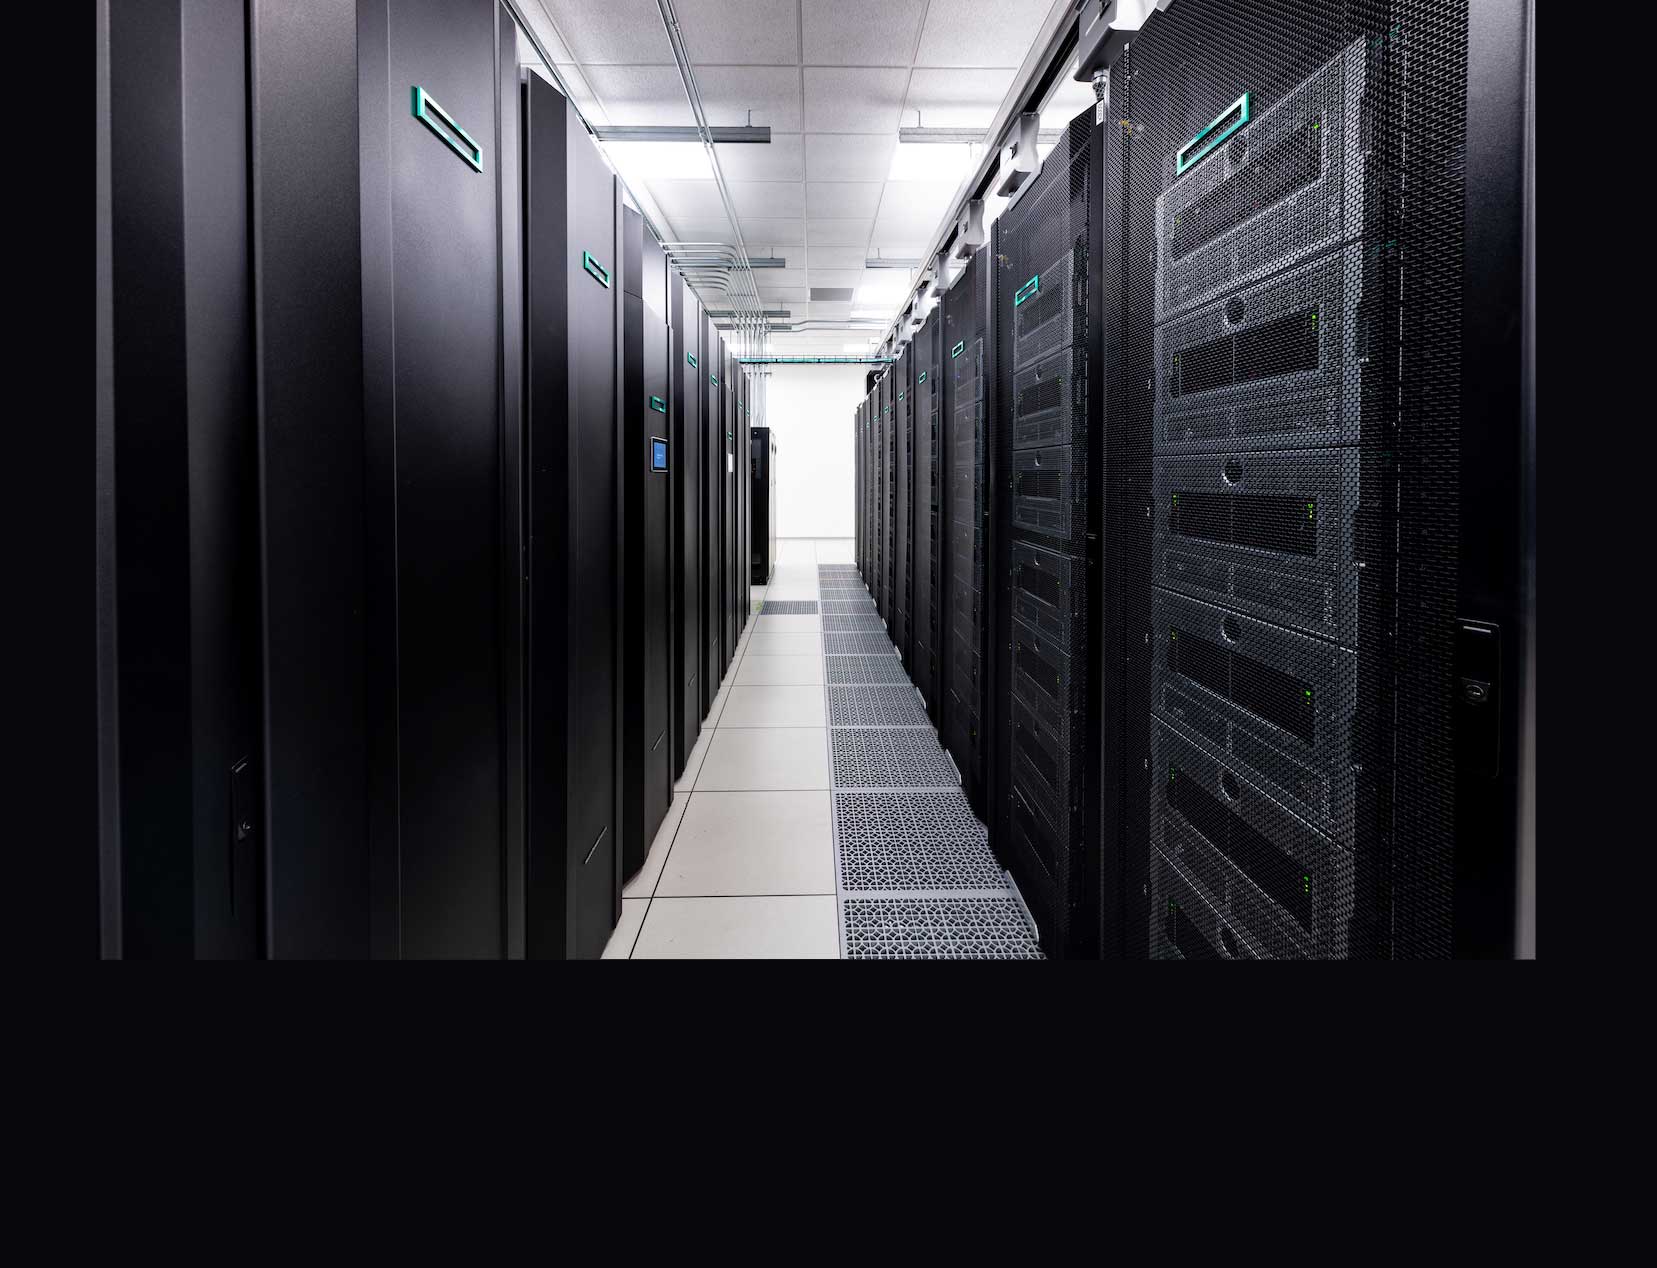 the cluster of processors that make up the Delta supercomputer fills a room